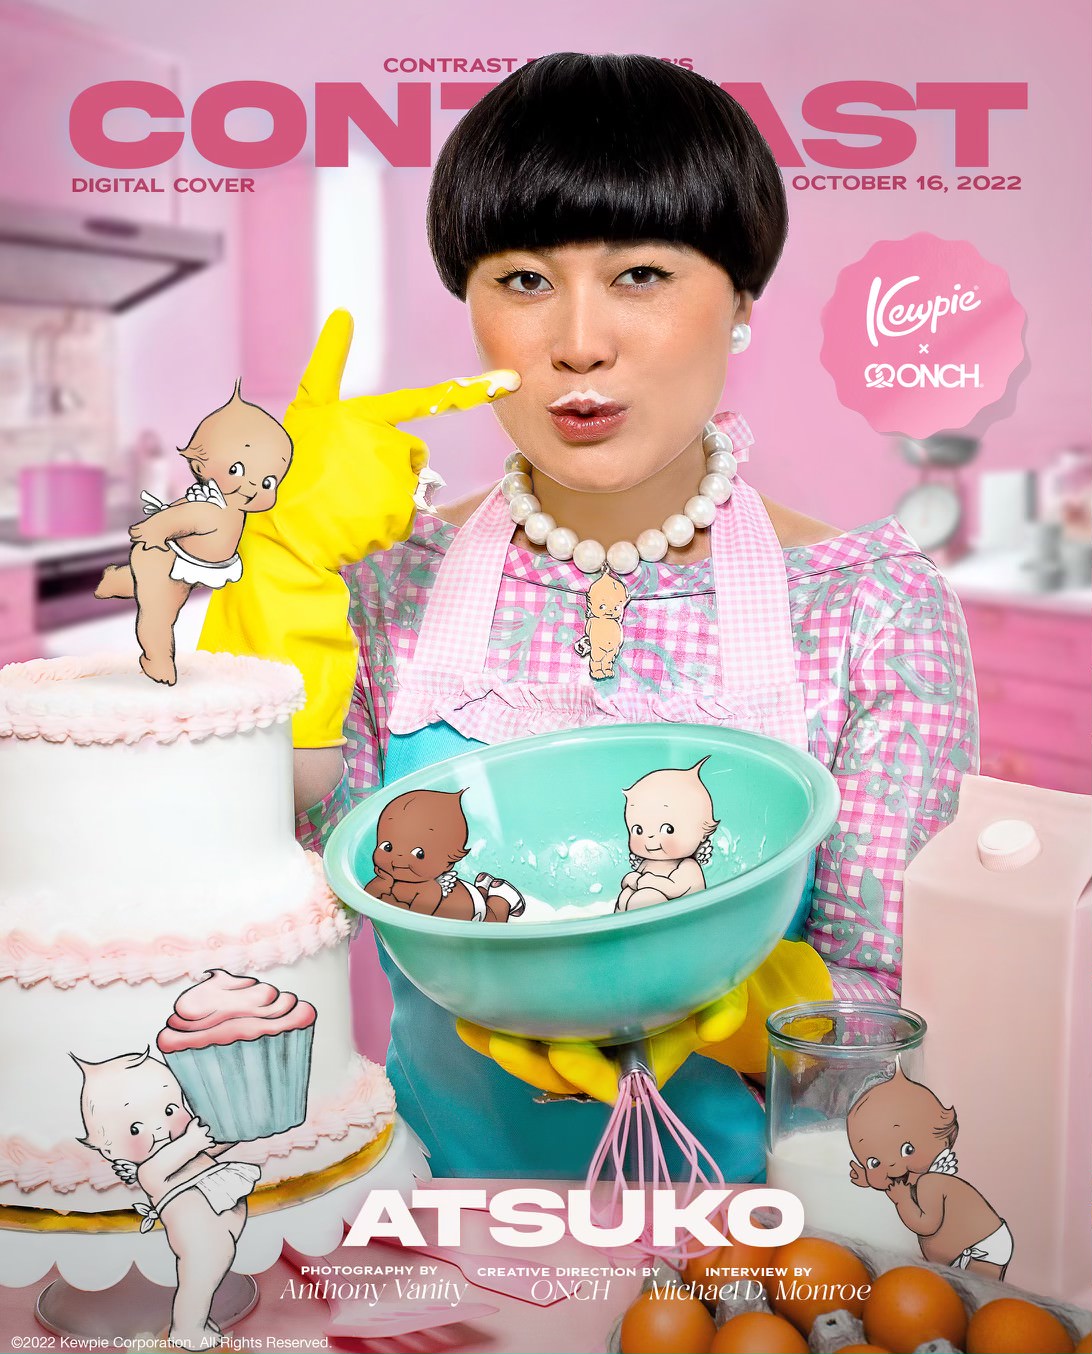 Comedian and HBO Max star Atsuko Okastuko poses on the cover of contrast Magazine wearing a pink and teal 1950s style dress paired with a pink and teal kitchen apron and yellow cleaning gloves. The image features 5 illustrated Kewpie doll characters representing different skin tones. This editorial was produced by ONCH, formerly known as Onch Movement. Atsuko is also wearing a Kewpie necklace designed by ONCH.